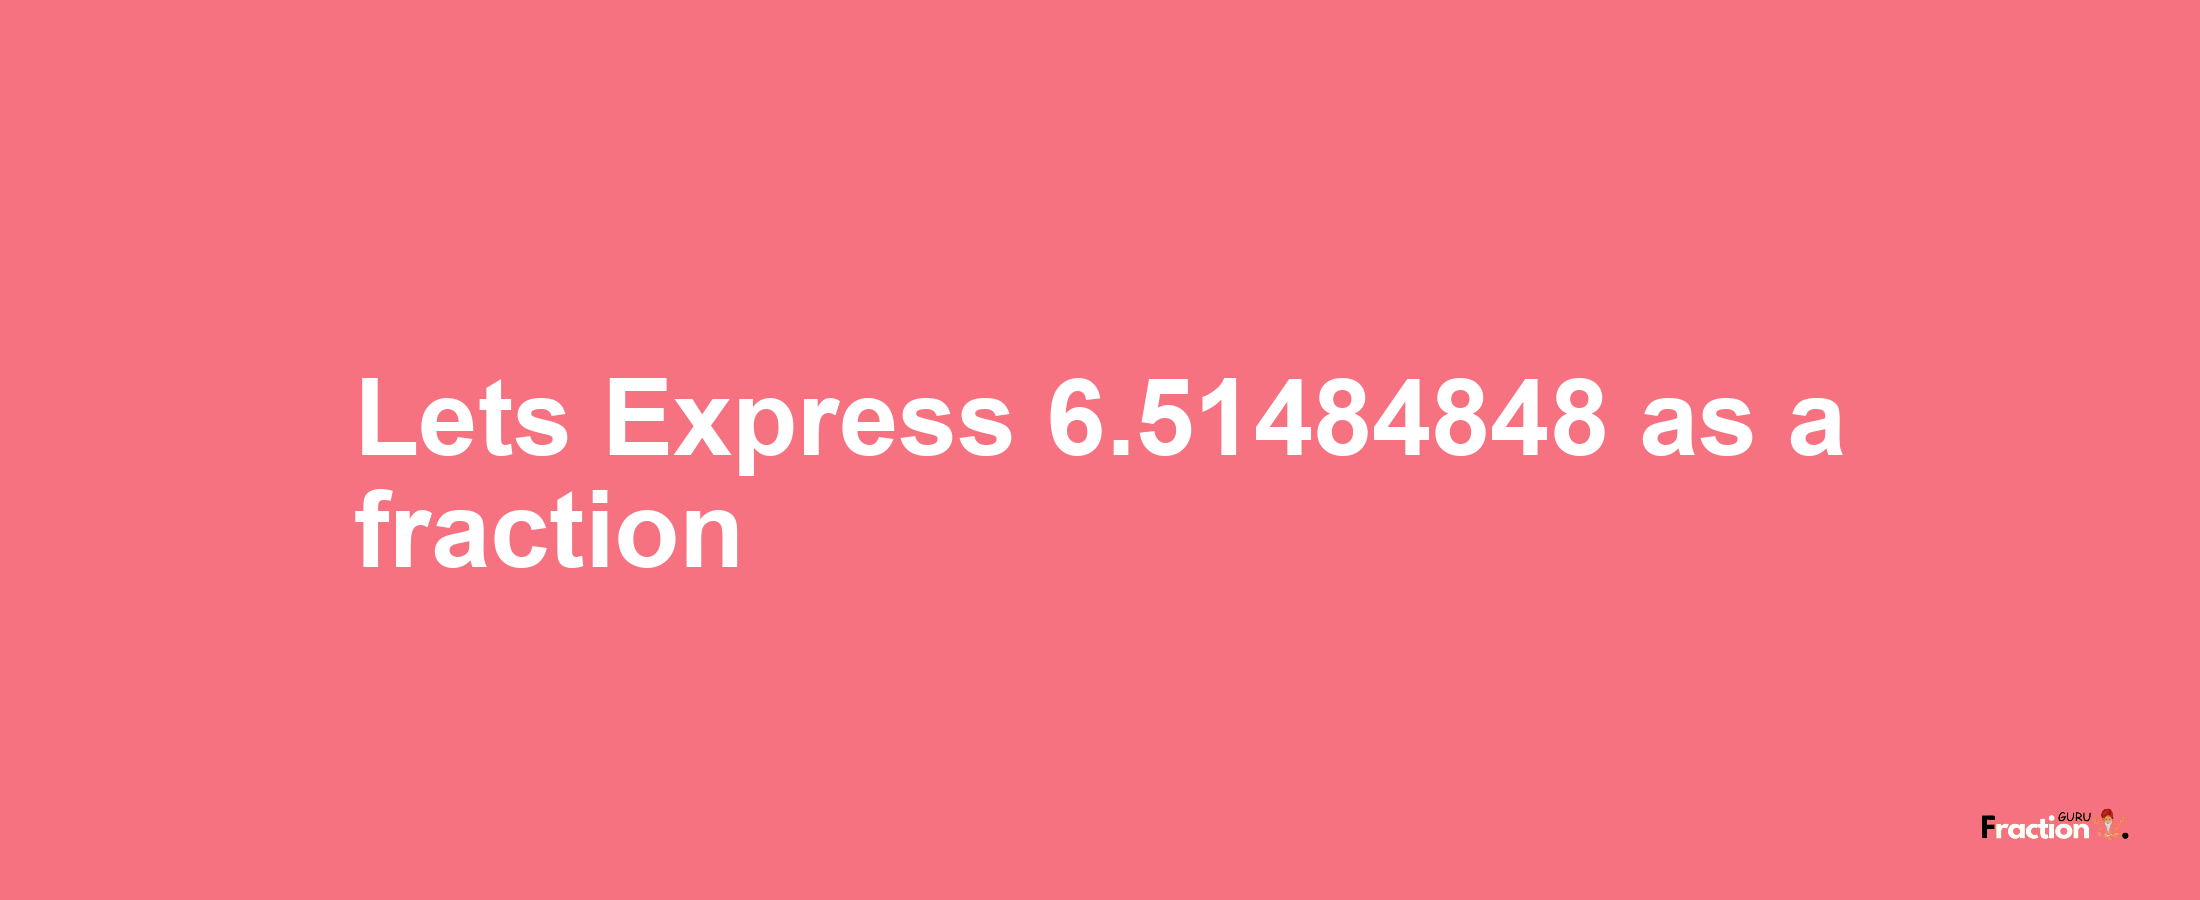 Lets Express 6.51484848 as afraction